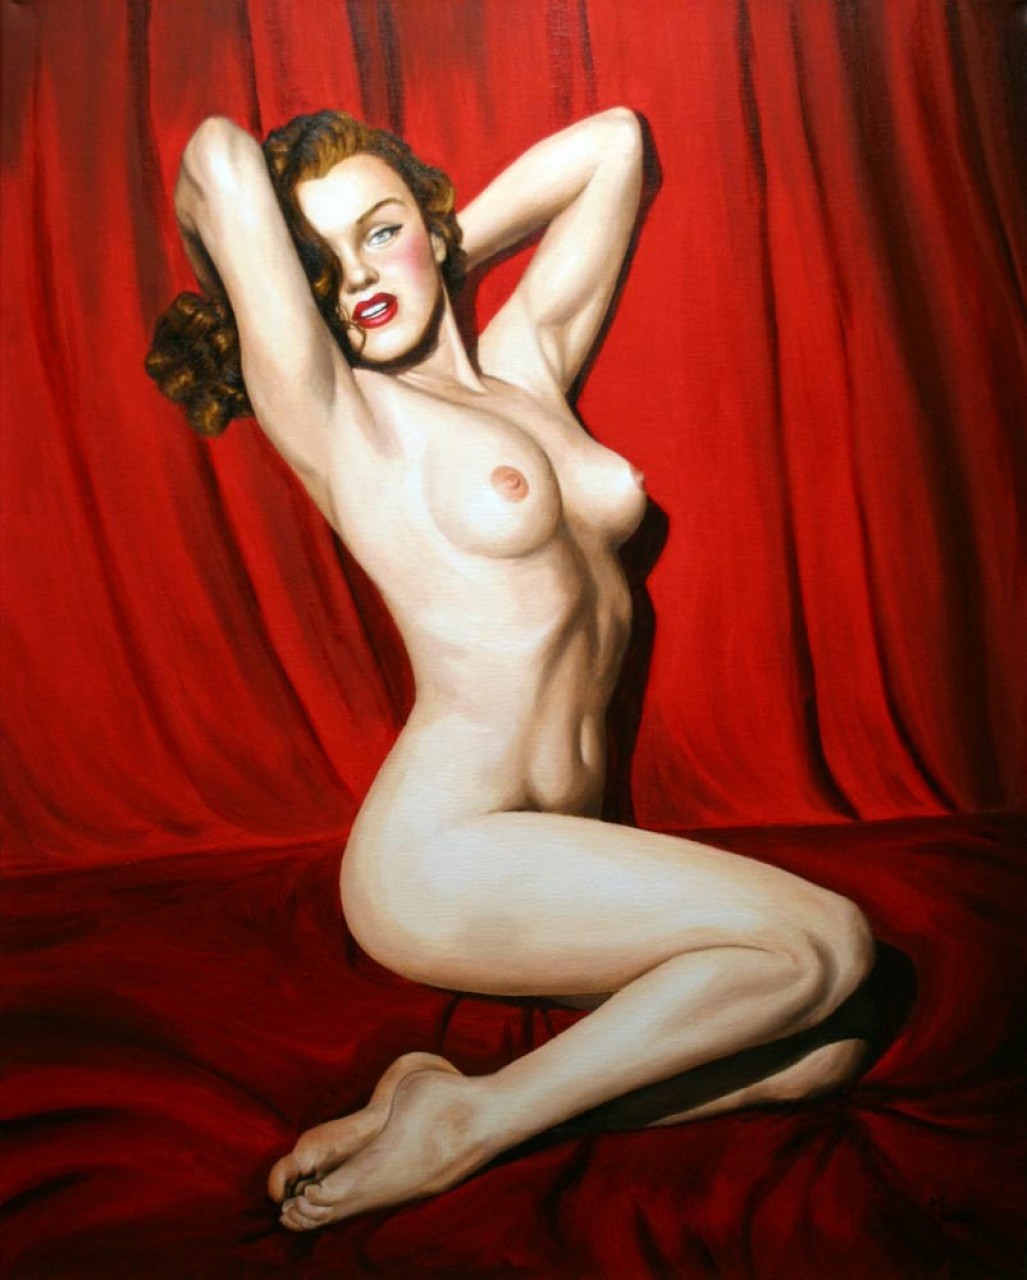 Marilyn 2021-06-14 - Red curtain, oils on canvas, 30 x 24 inches, 2020.